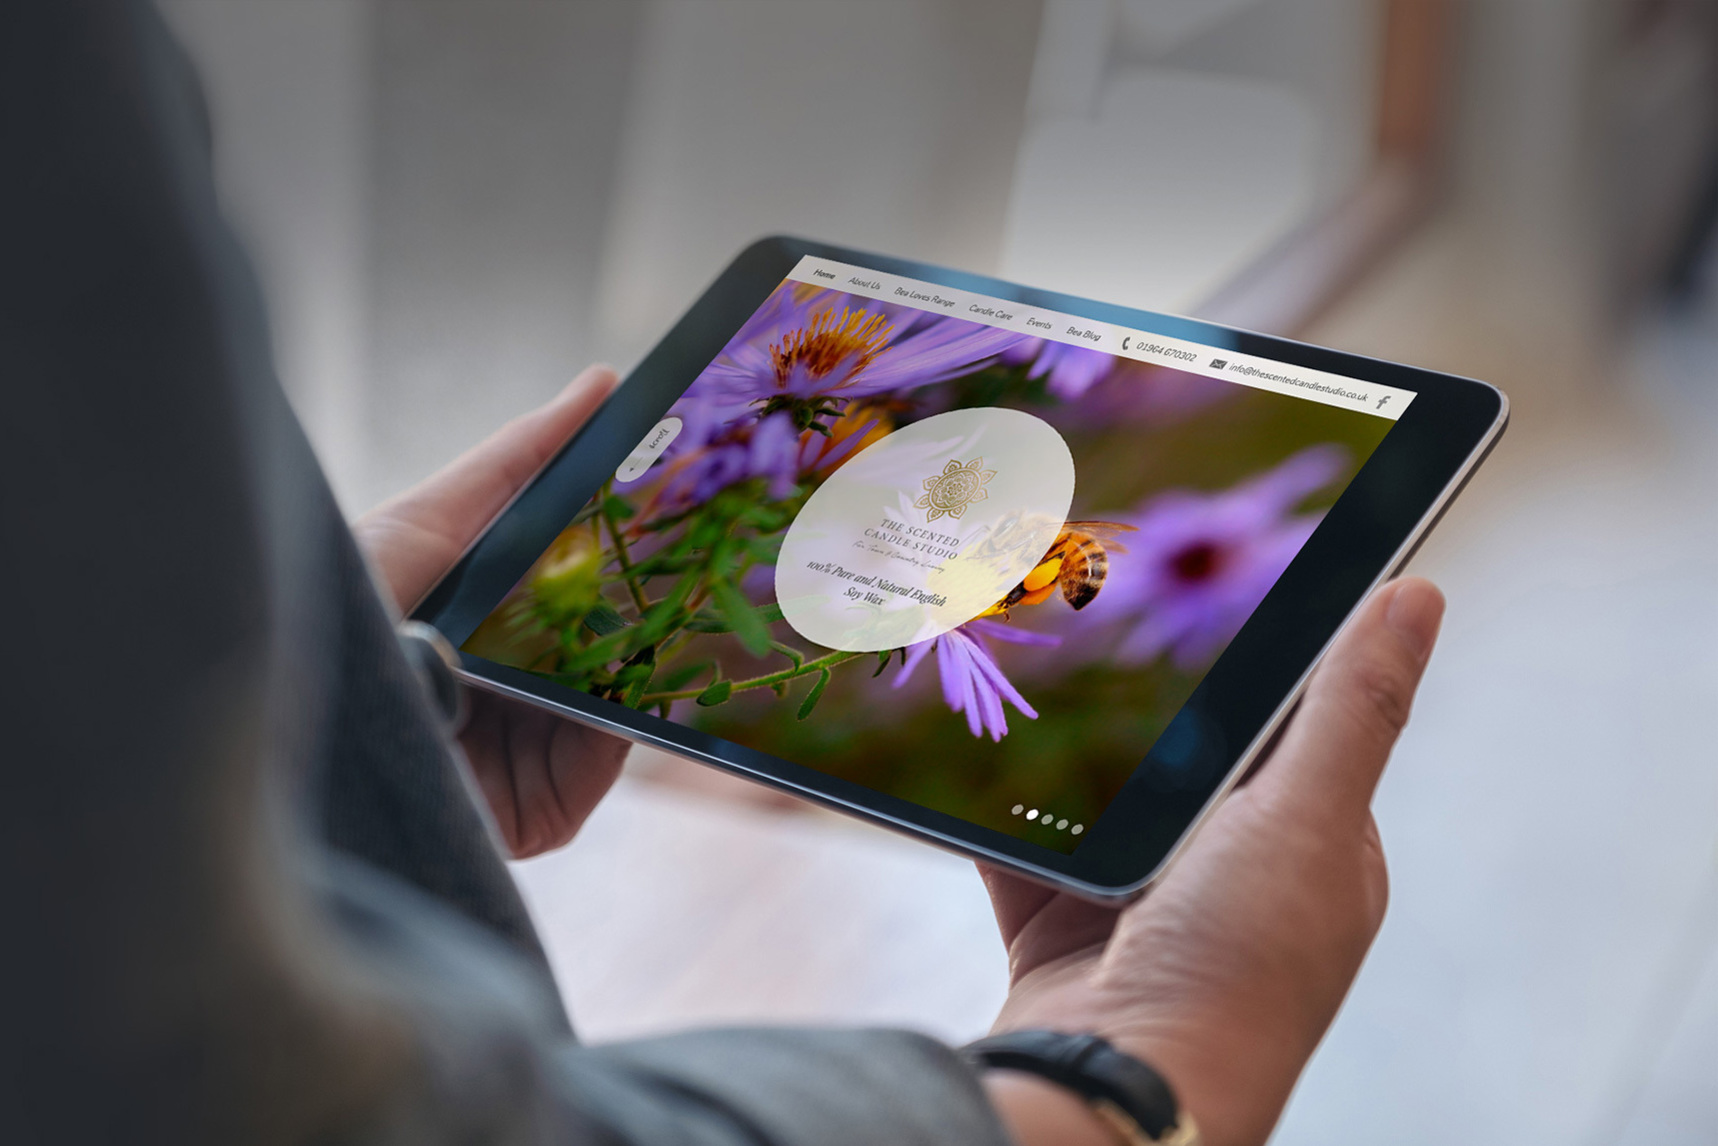 A website design shown on a tablet device